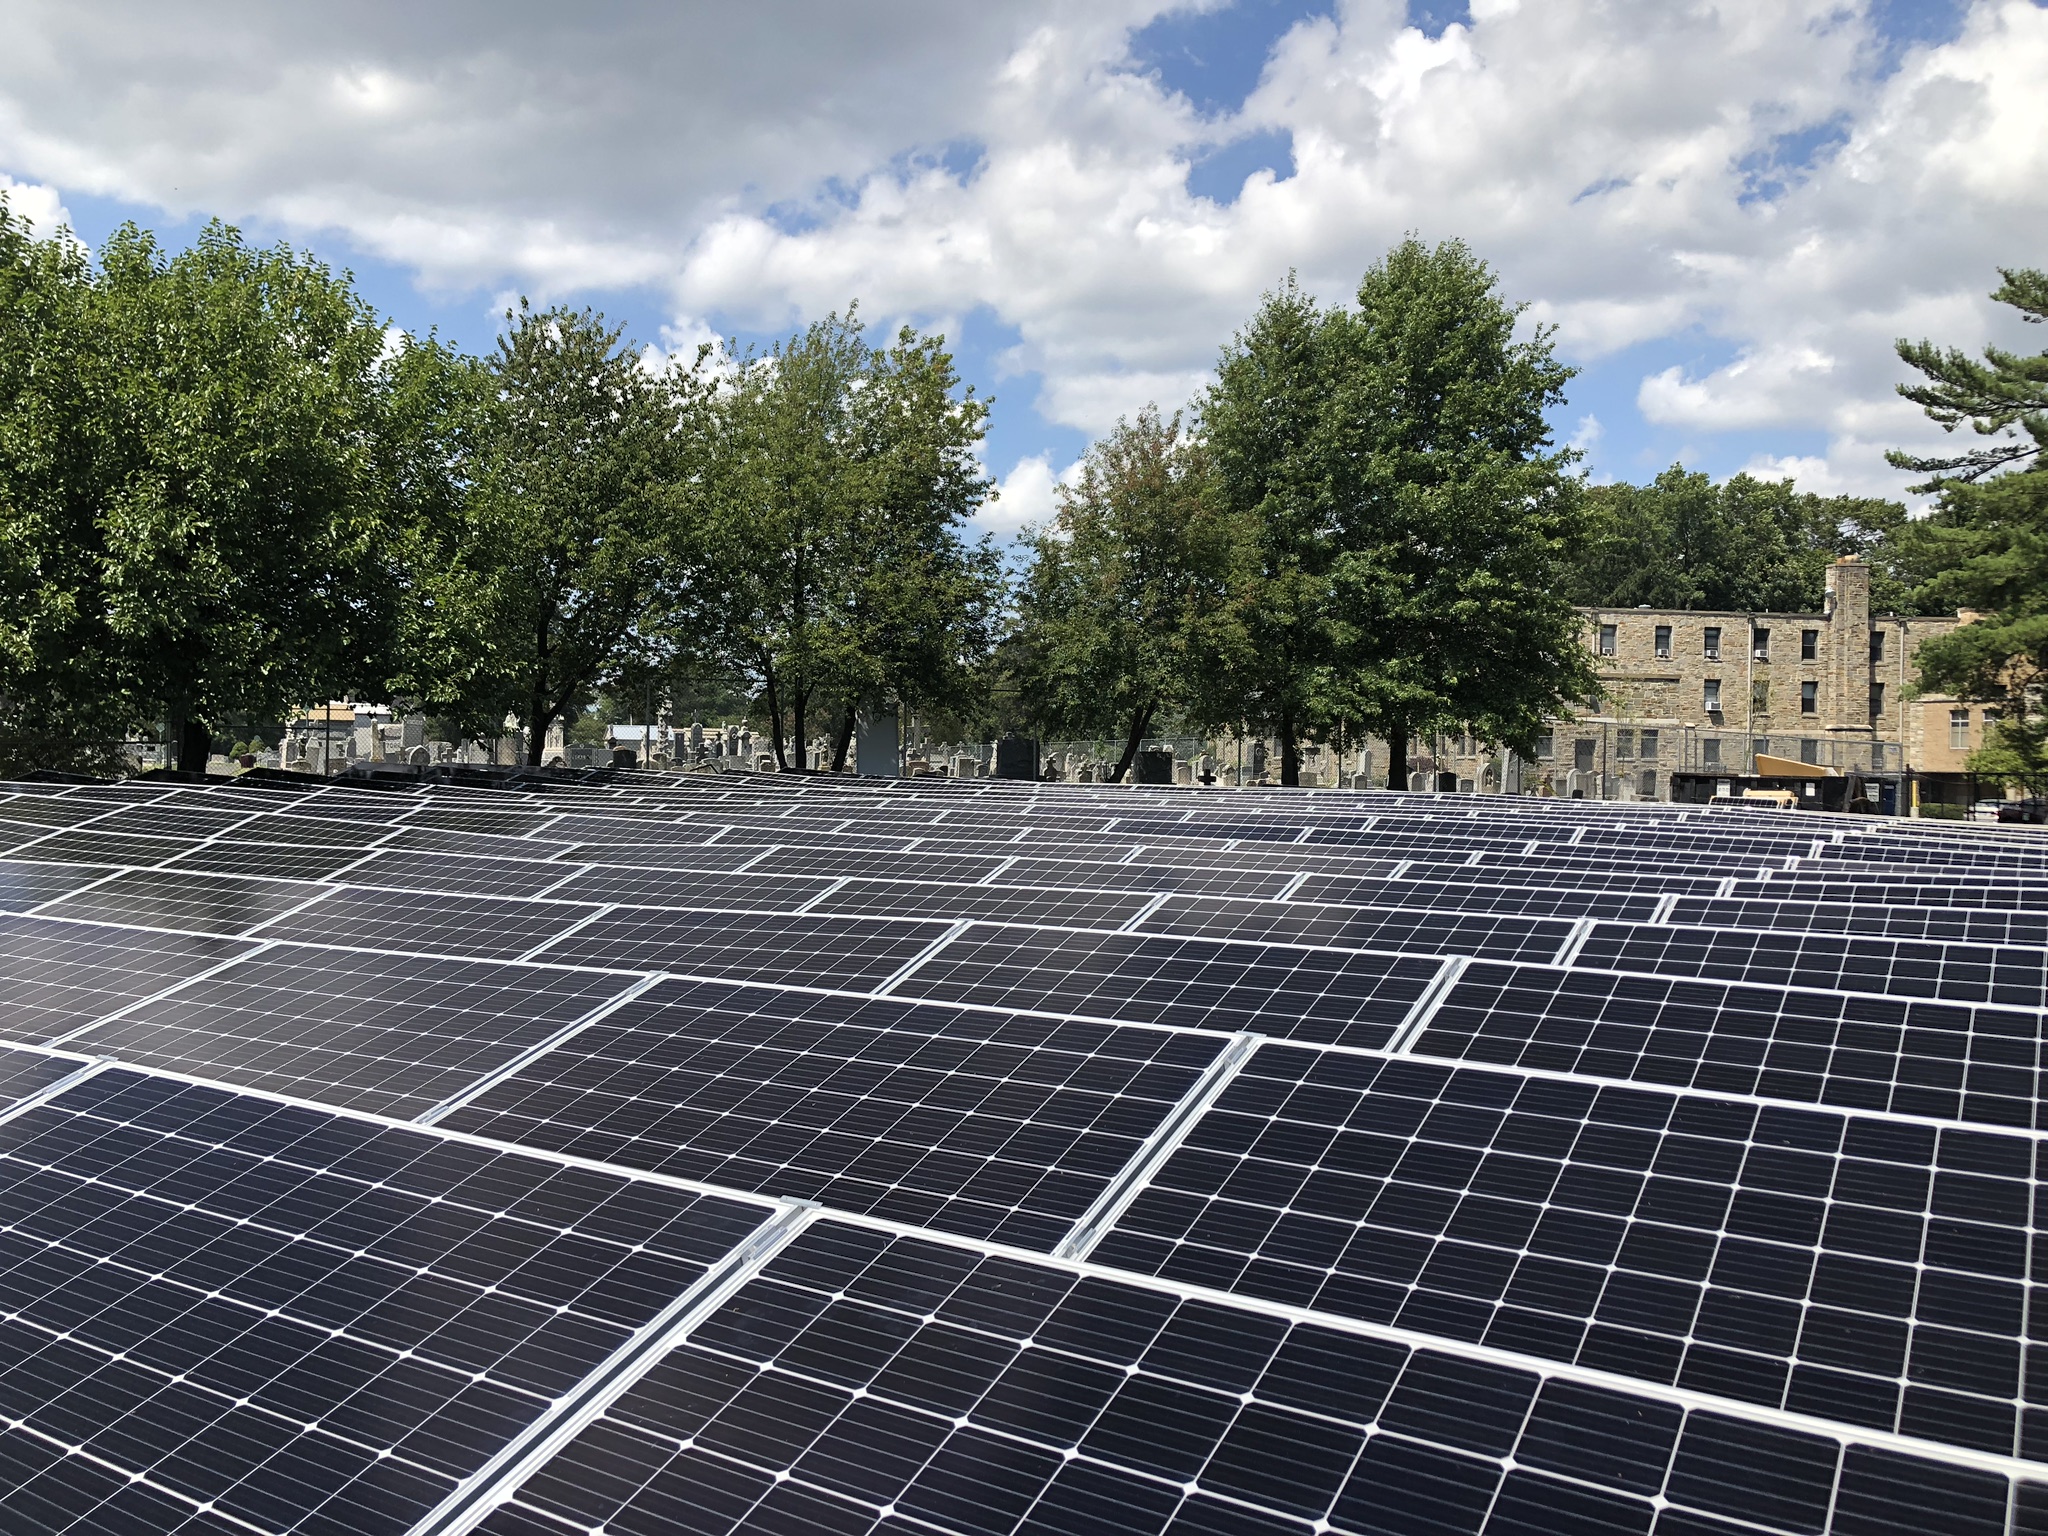 Community Solar Brings Renewable Power to All